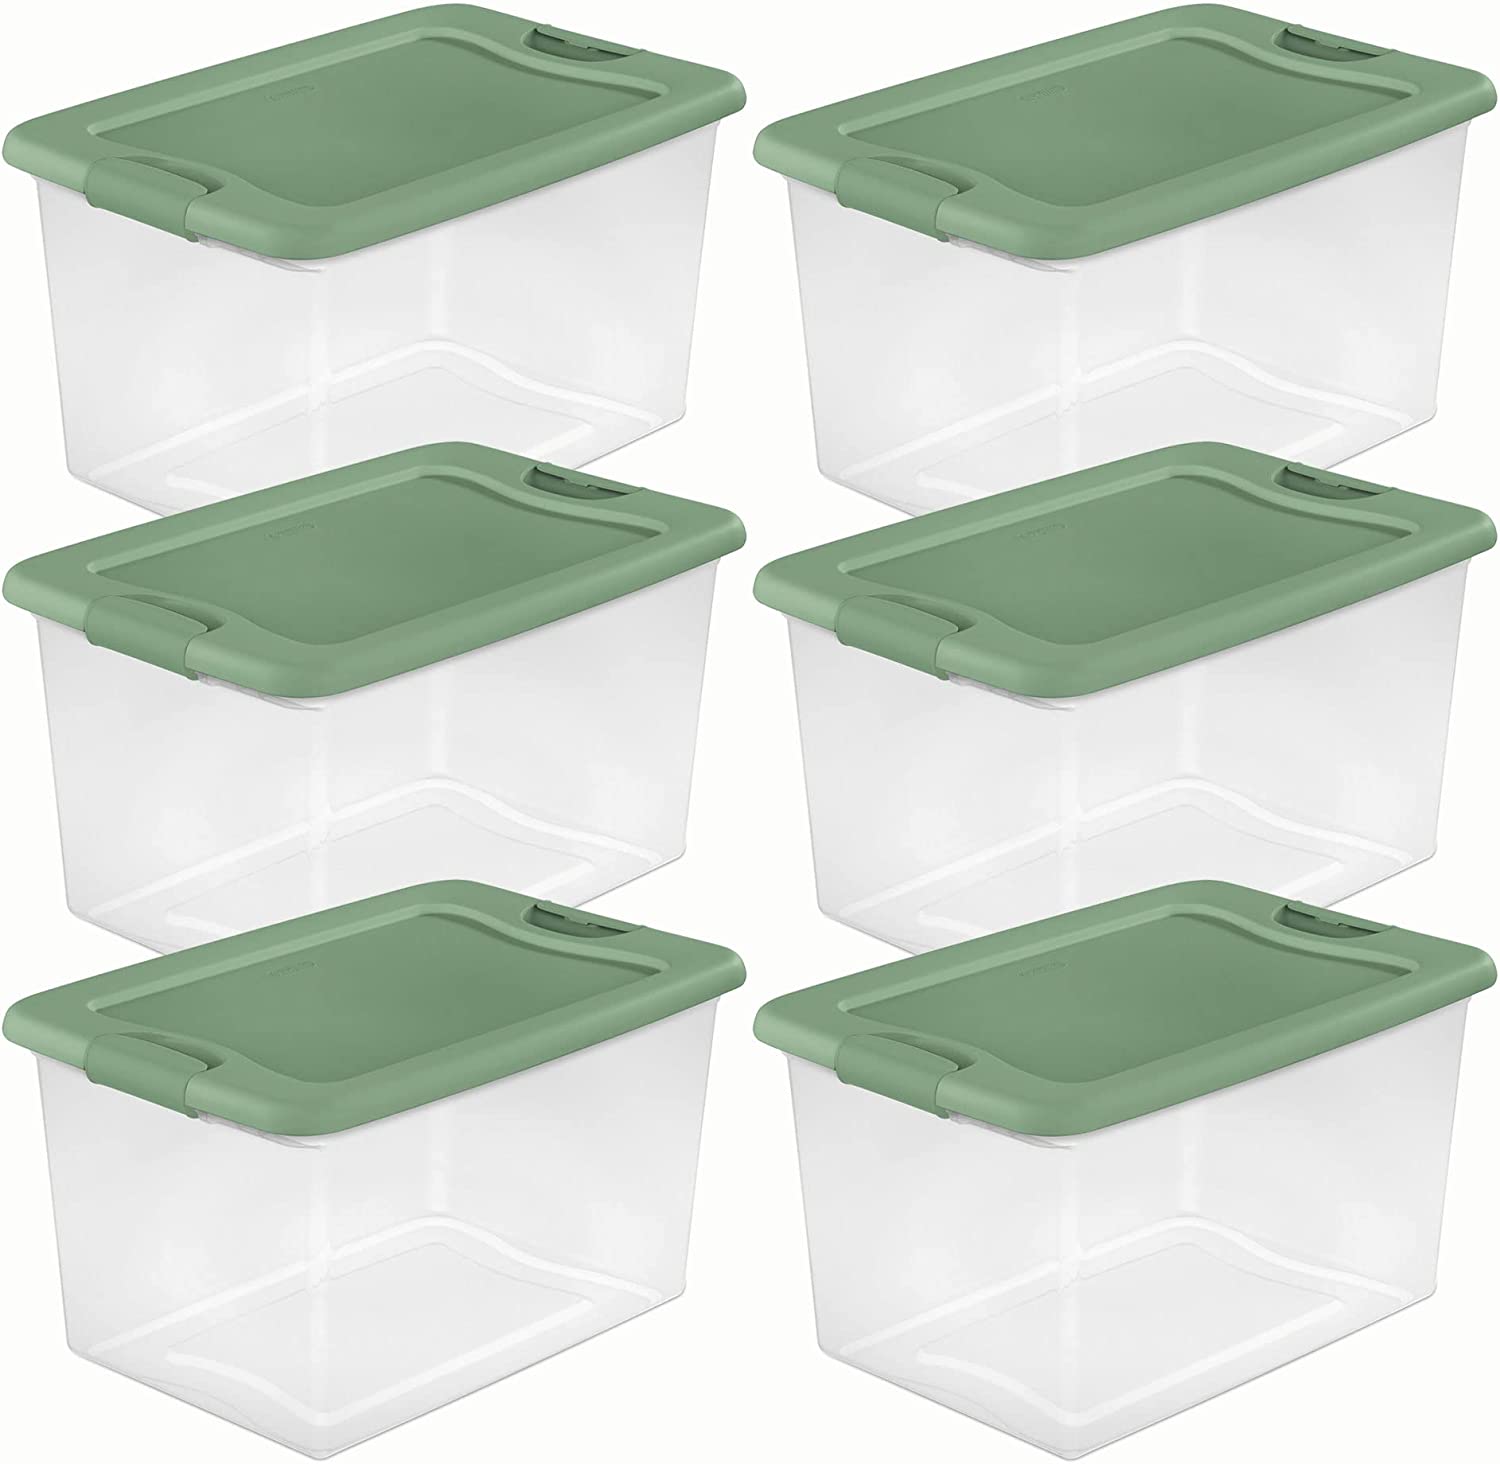 GAMENOTE Small Storage Bins with Lids - 5 Qt 6 Pack Stackable